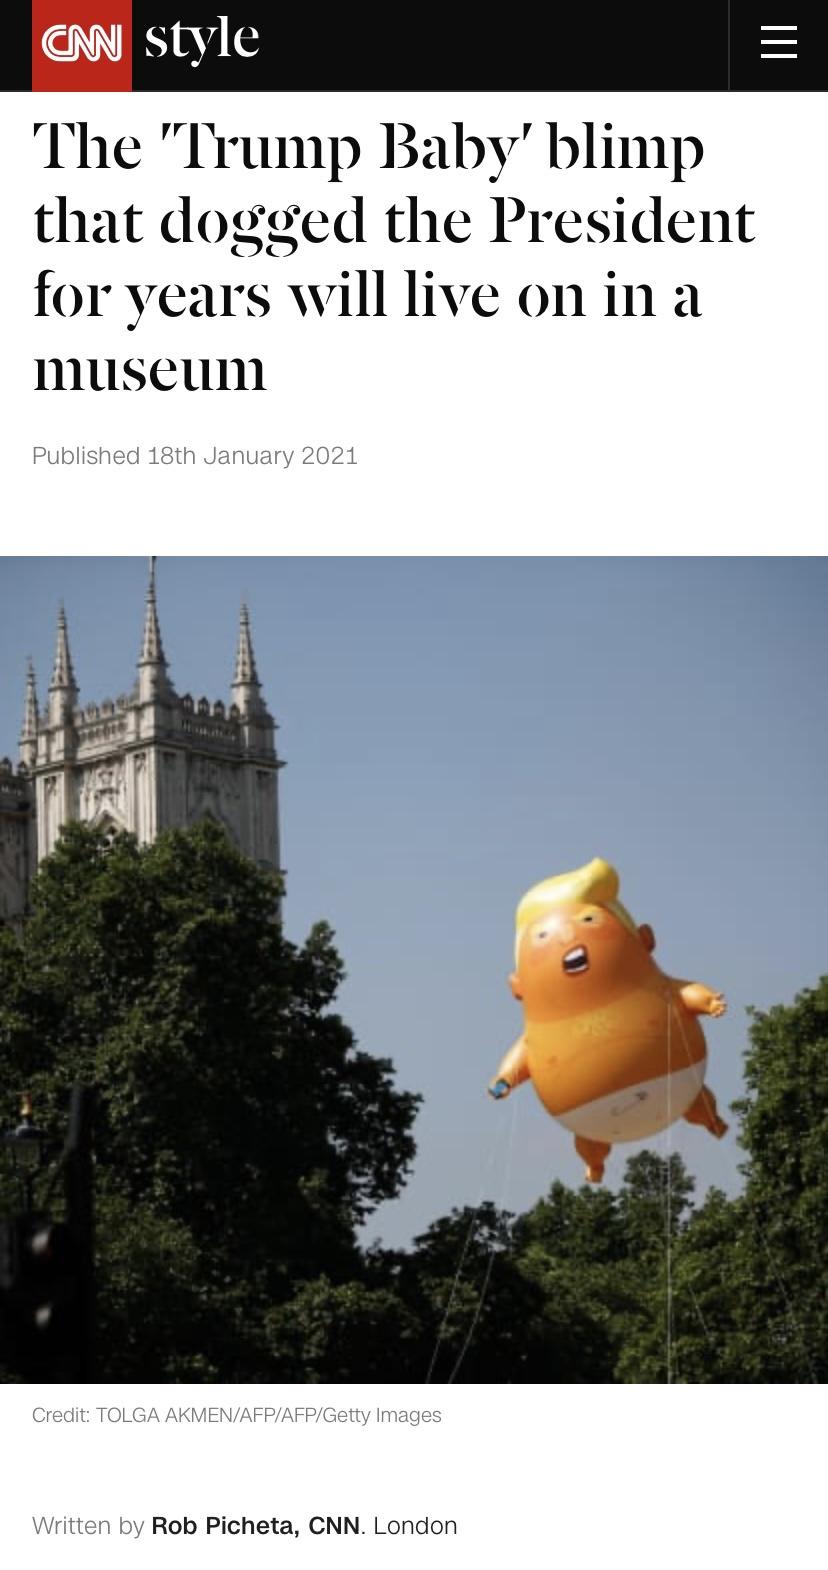 westminster abbey - Mil can style The "Trump Baby' blimp that dogged the President for years will live on in a museum Published 18th Credit Tolga AkmenAfpAfpGetty Images Written by Rob Picheta, Cnn. London